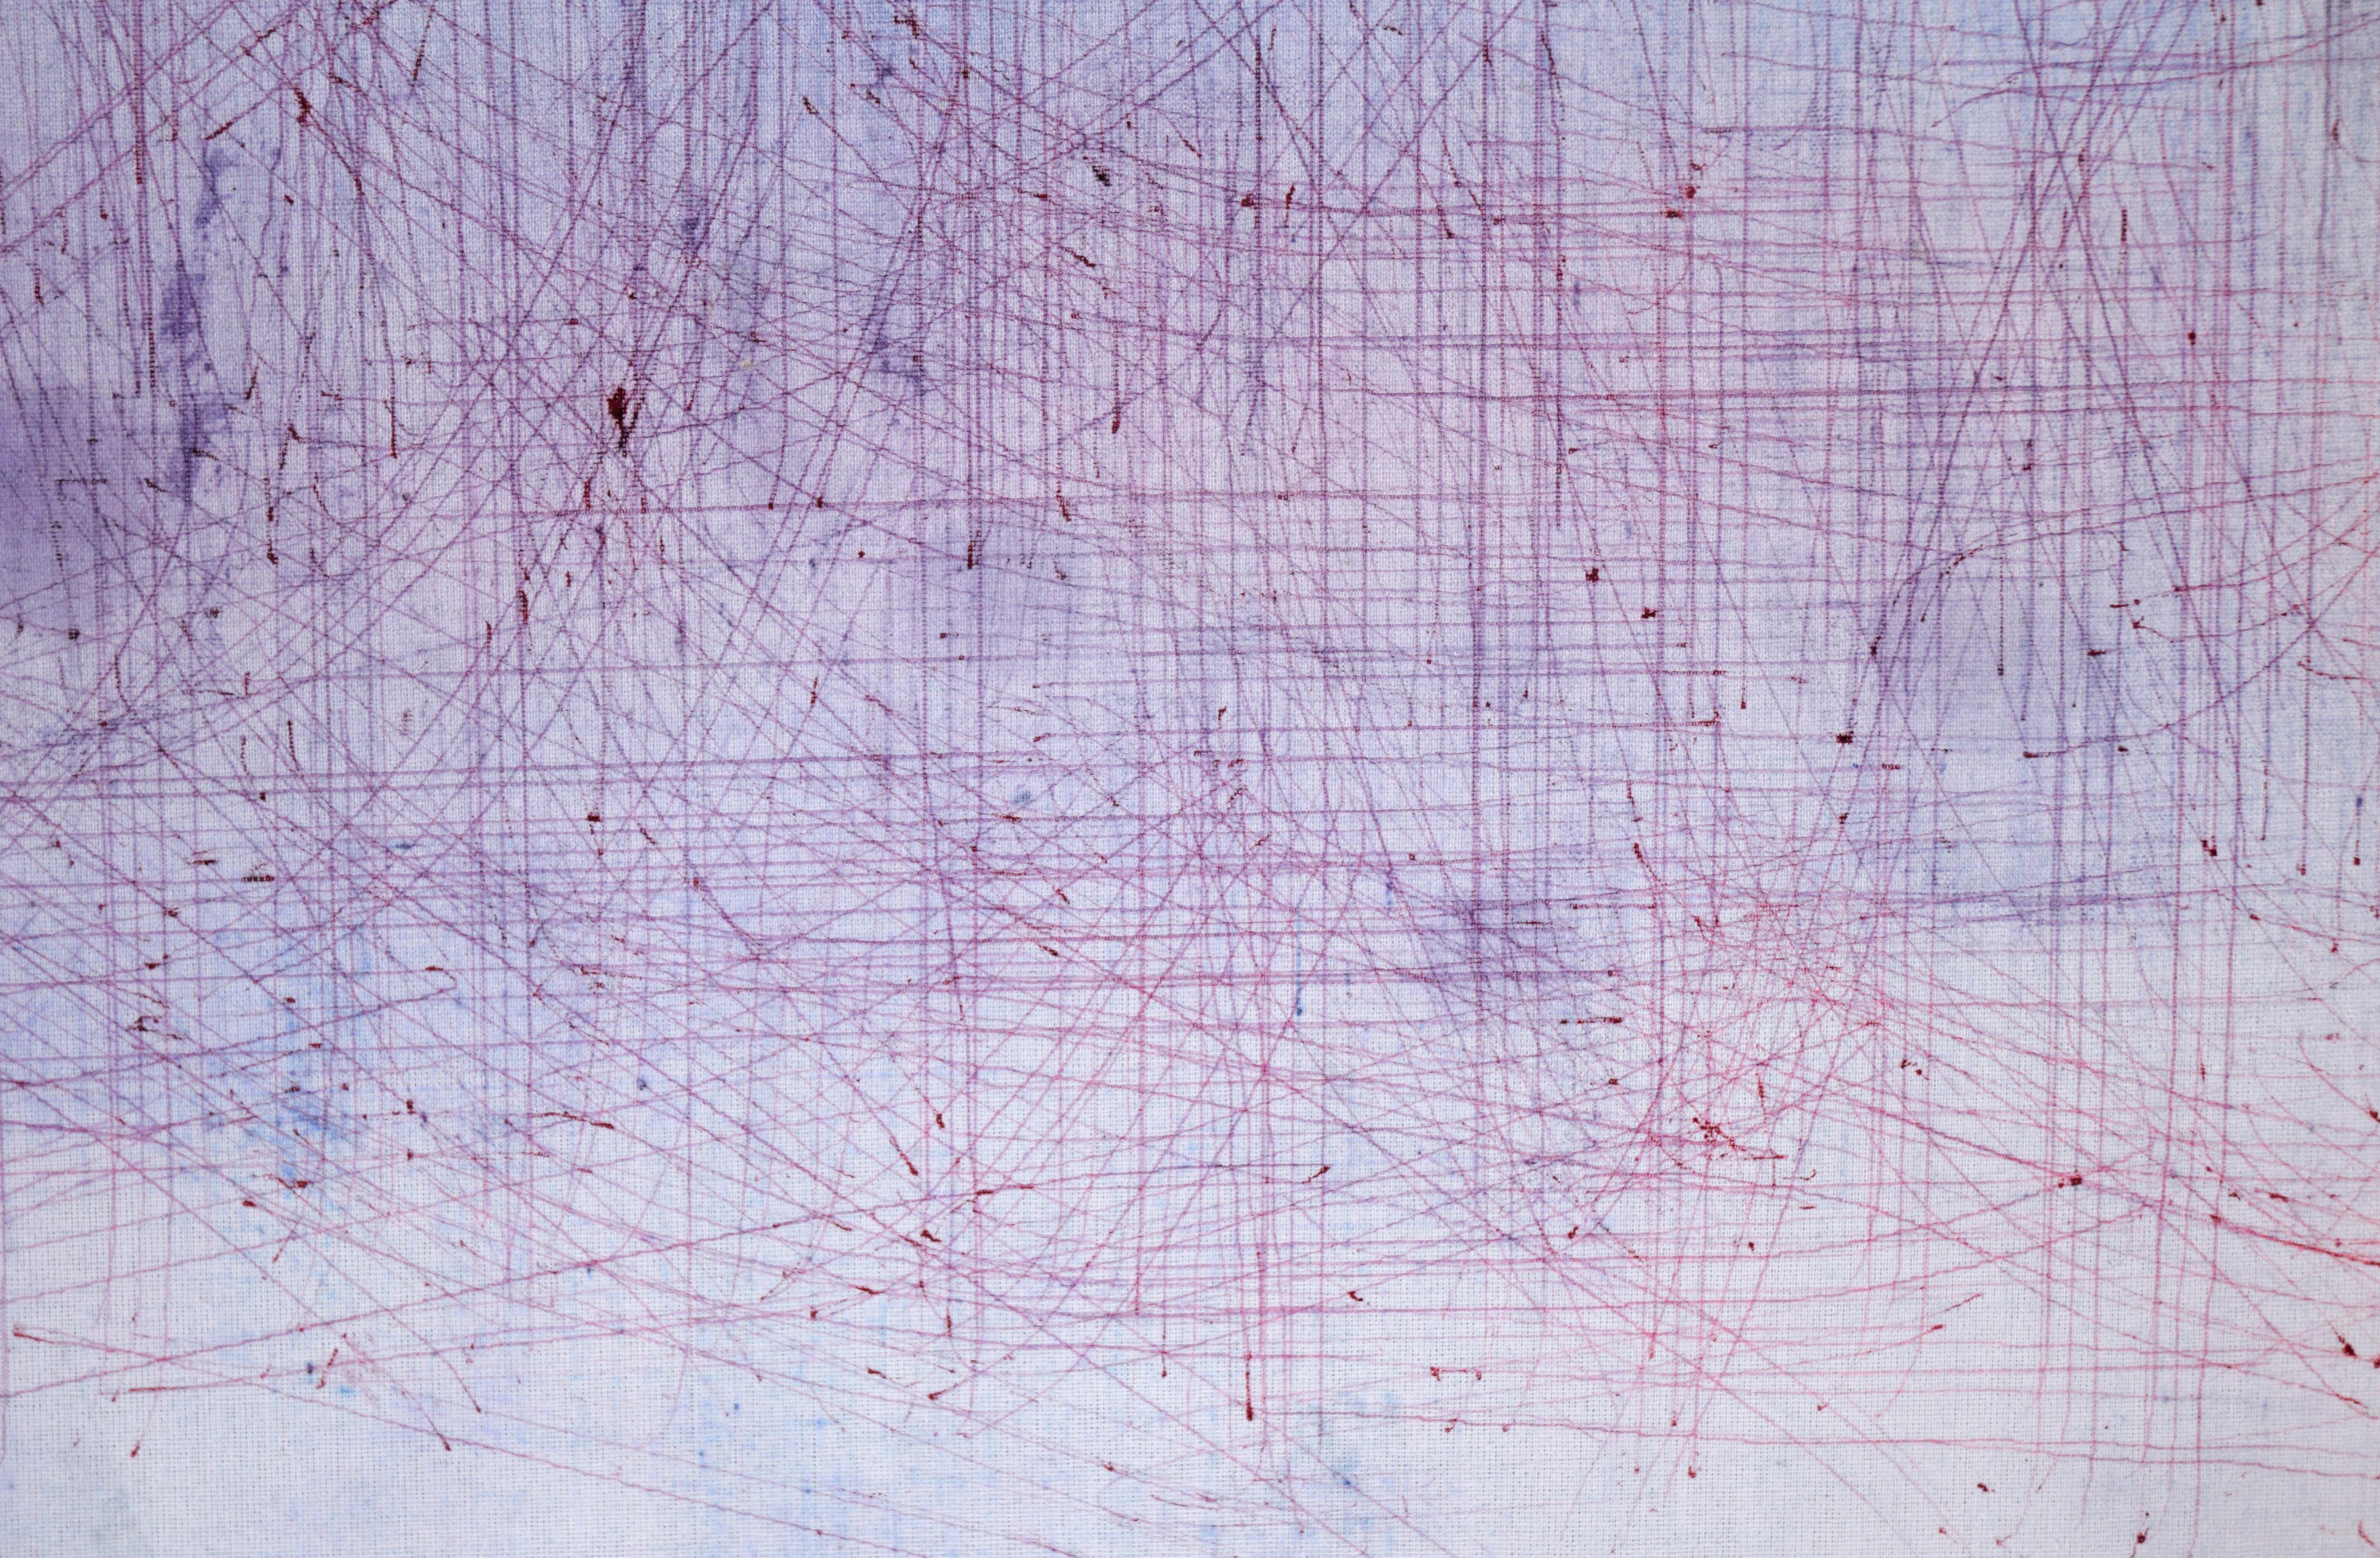 Dynamic abstract by D. Whelan (American, 20th Century). Hazy purples and blues make up the background of this piece, with a few splatters of darker colors. Over the top, reddish lines cover the surface - some parallel and straight, others